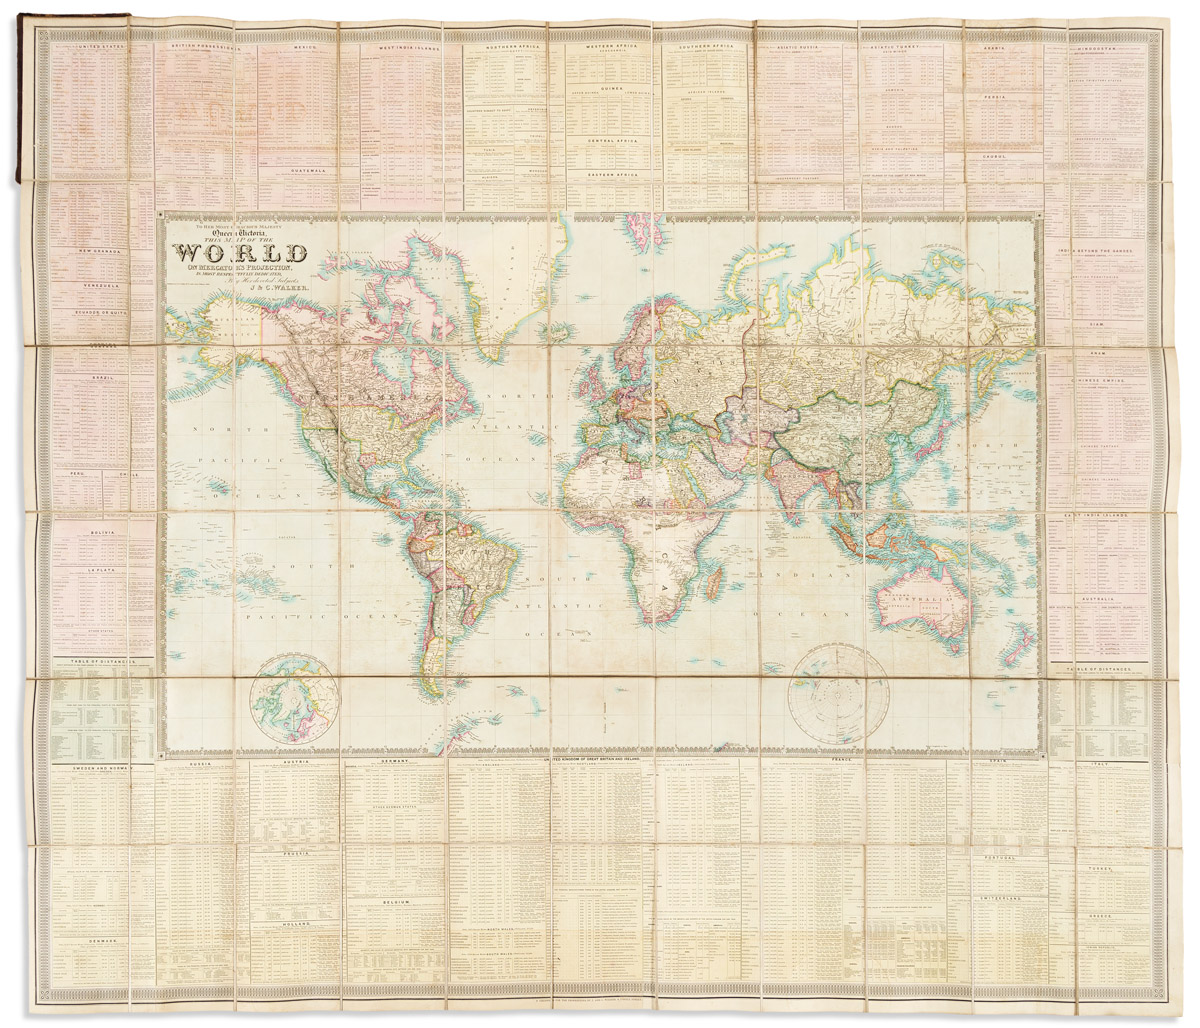 To Her Most Gracious Majesty Queen Victoria, This Map of the World on Mercator's Projection is Most Respectfully Dedicated.